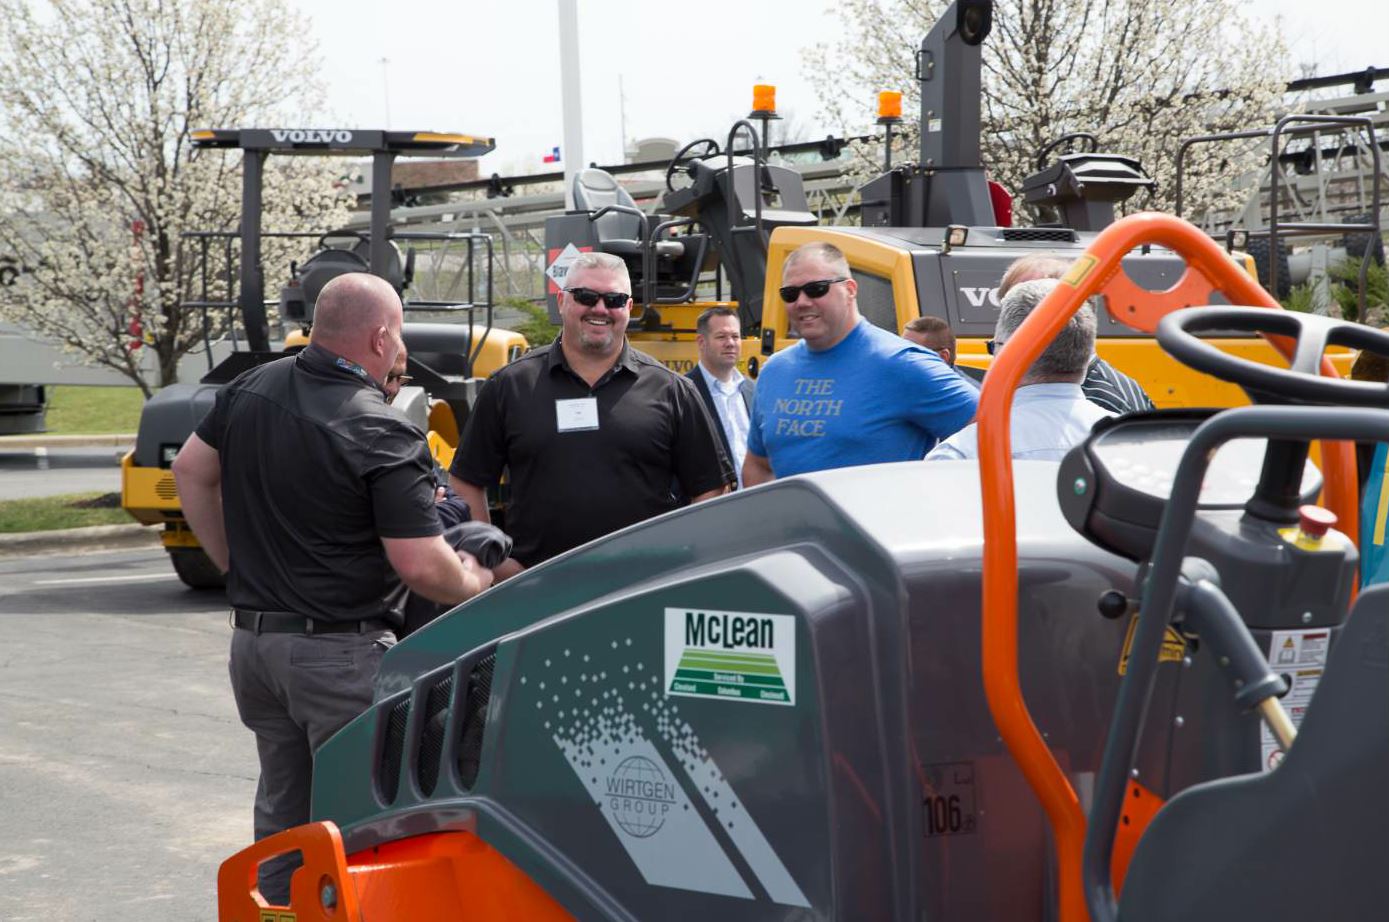 The Ohio Asphalt Expo occurs in March and includes a trade show, heavy equipment exposition and concurrent educational sessions.